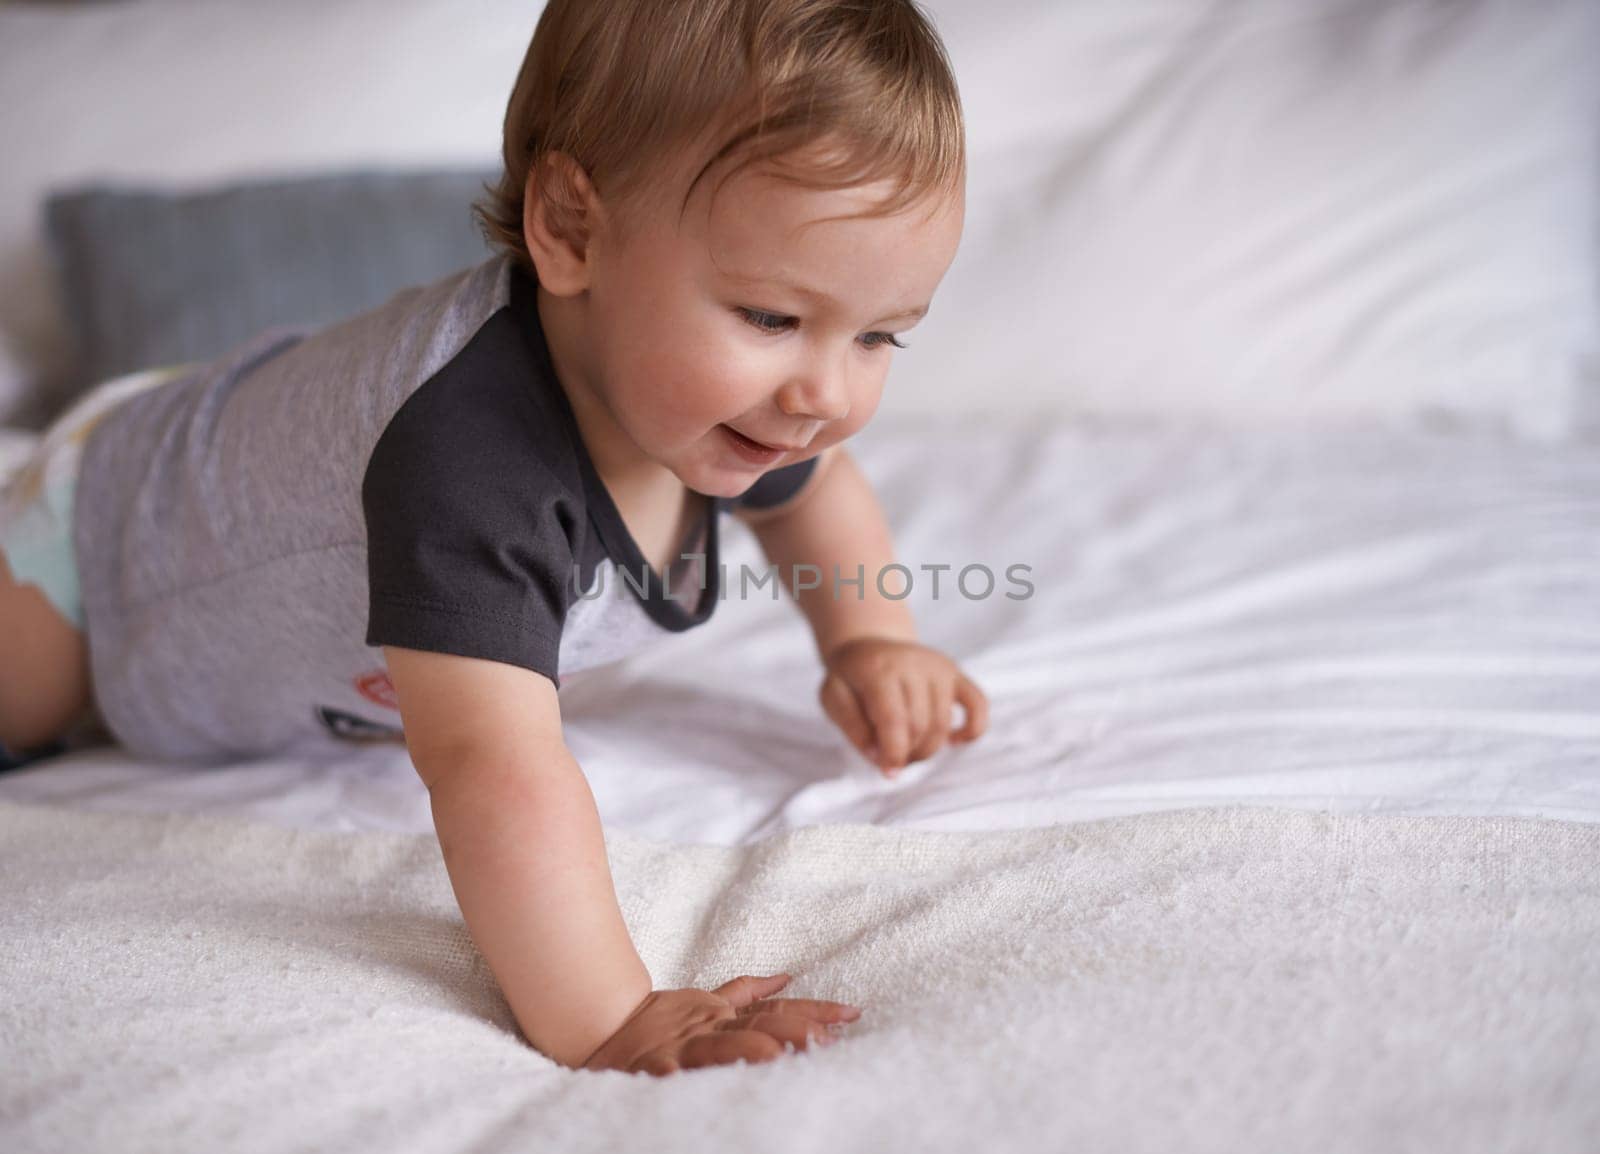 Boy, baby and learning to crawl in home, bed and kid for motor skills in bedroom on weekend. Child development, happy toddler and calm or comfortable, wellness and curious for health and growth.